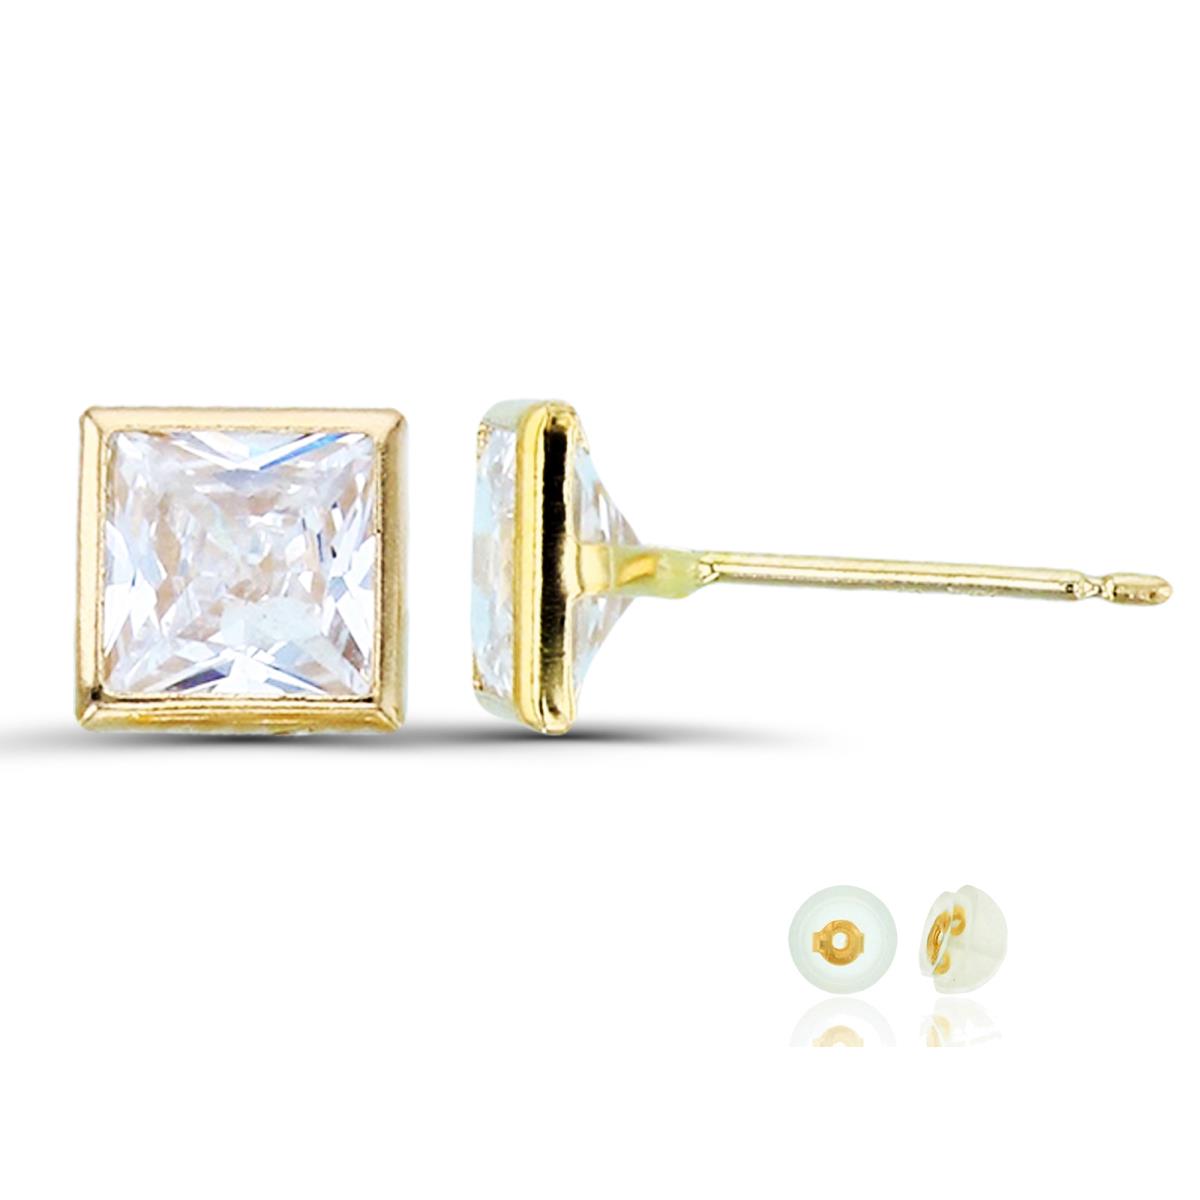 10K Yellow Gold 5mm Square CZ Bezel Stud Earring with Silicone Back